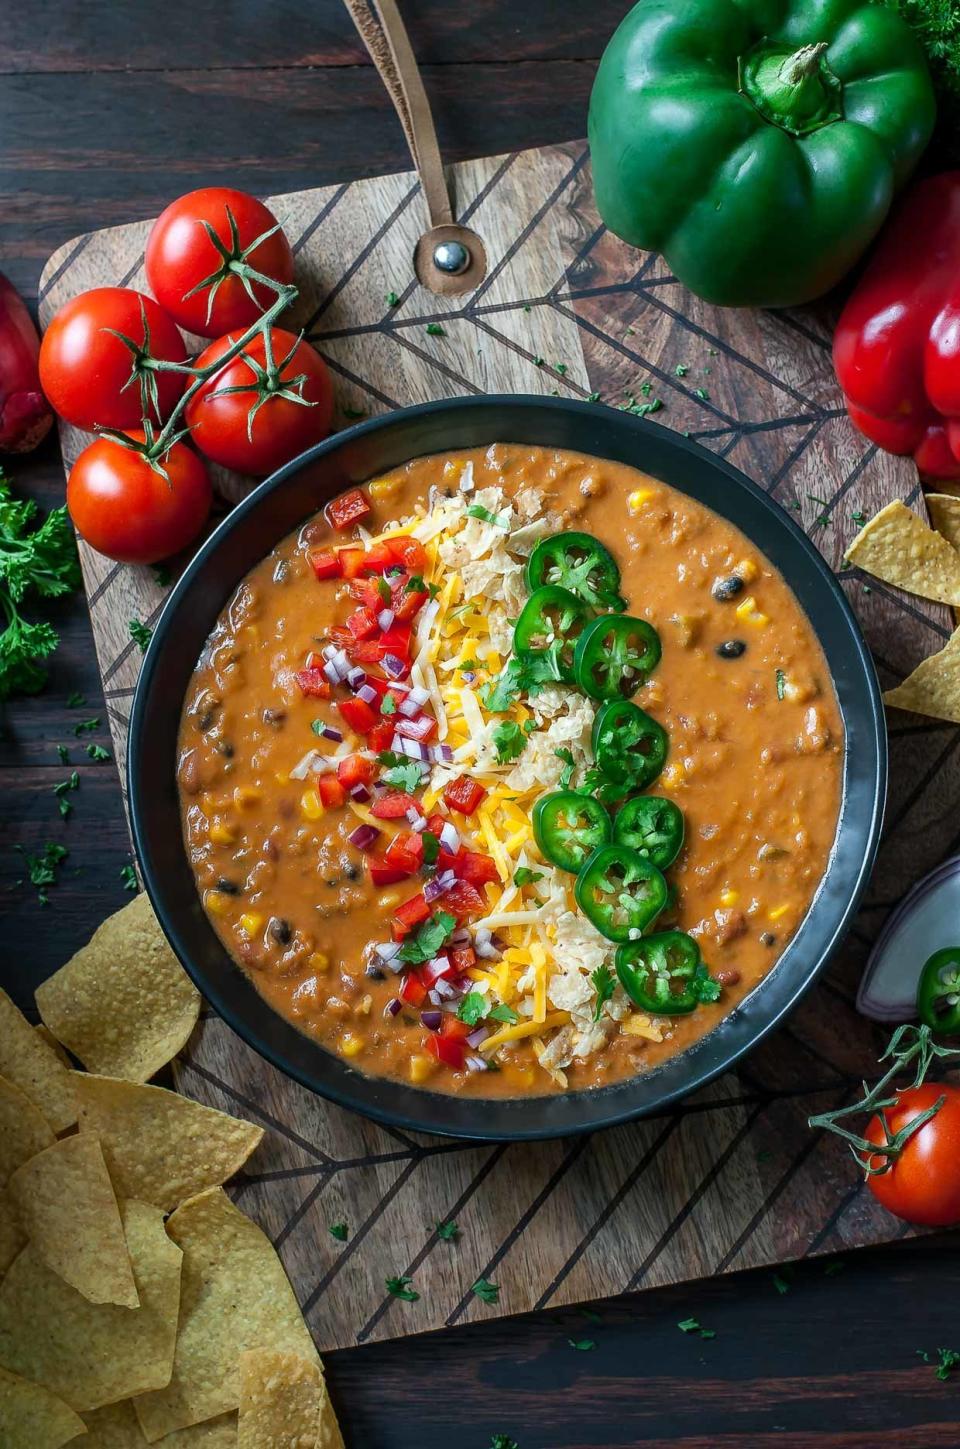 <strong>Get the <a href="https://peasandcrayons.com/2017/02/vegetarian-lentil-tortilla-soup.html" target="_blank">Vegetarian Lentil Tortilla Soup recipe</a> from Peas and Crayons</strong>